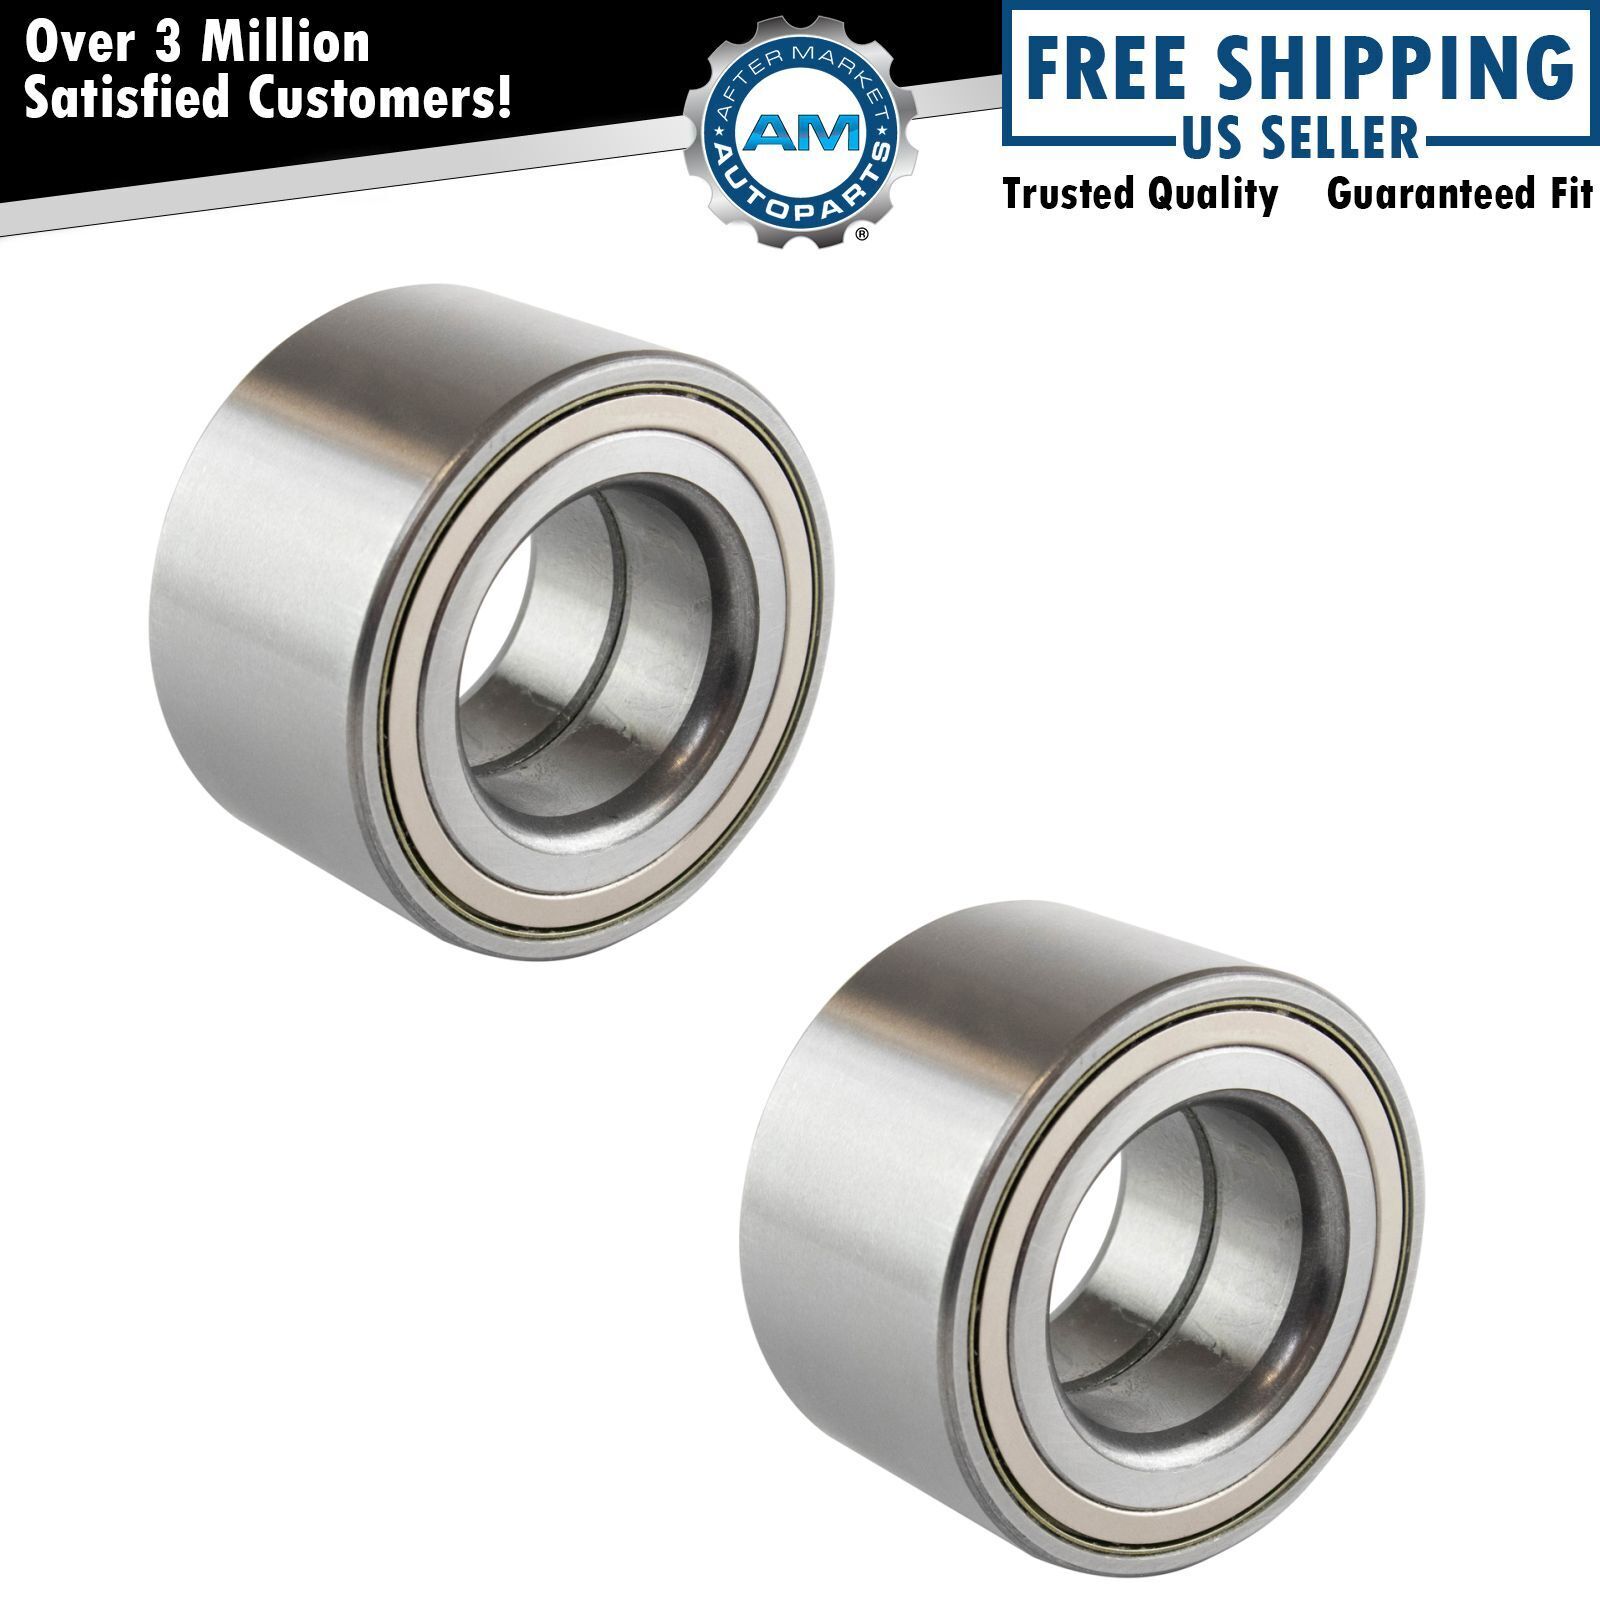 Wheel Hub Bearing Front Pair Set for Ford Escape Mazda Tribute Mercury Mariner